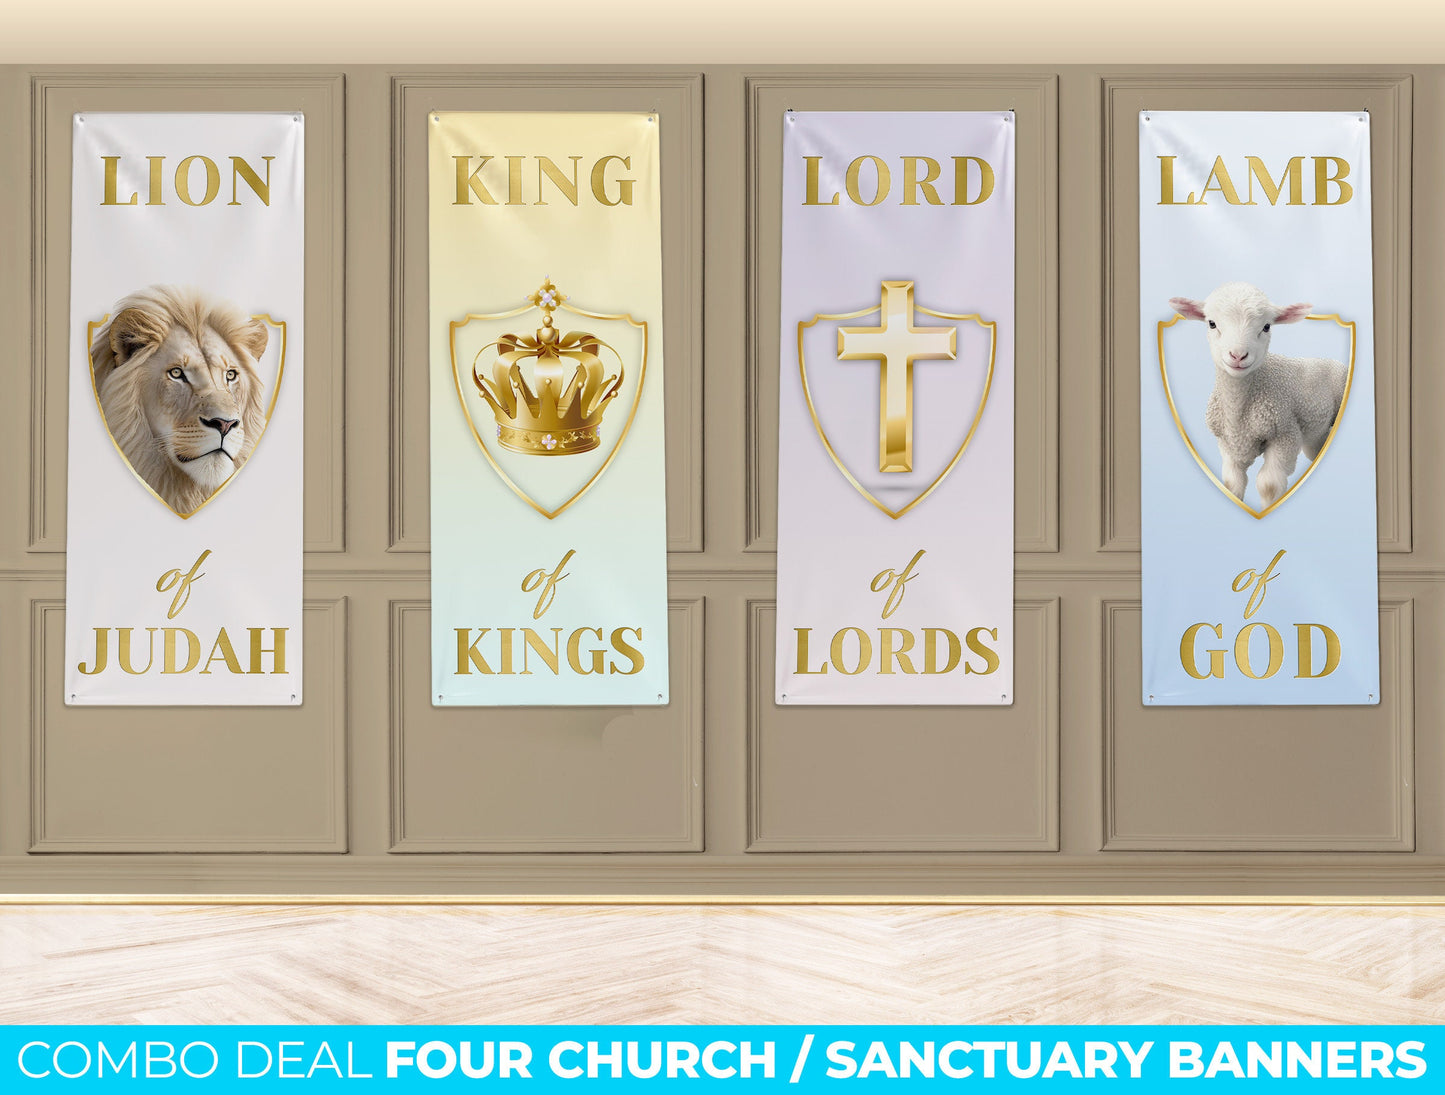 Set of 4 Church Banners, Sanctuary Banners, Mission Worship, Church Wall Vinyl Banner, Lion of Judah Lamb of God Lord of Lords King of Kings